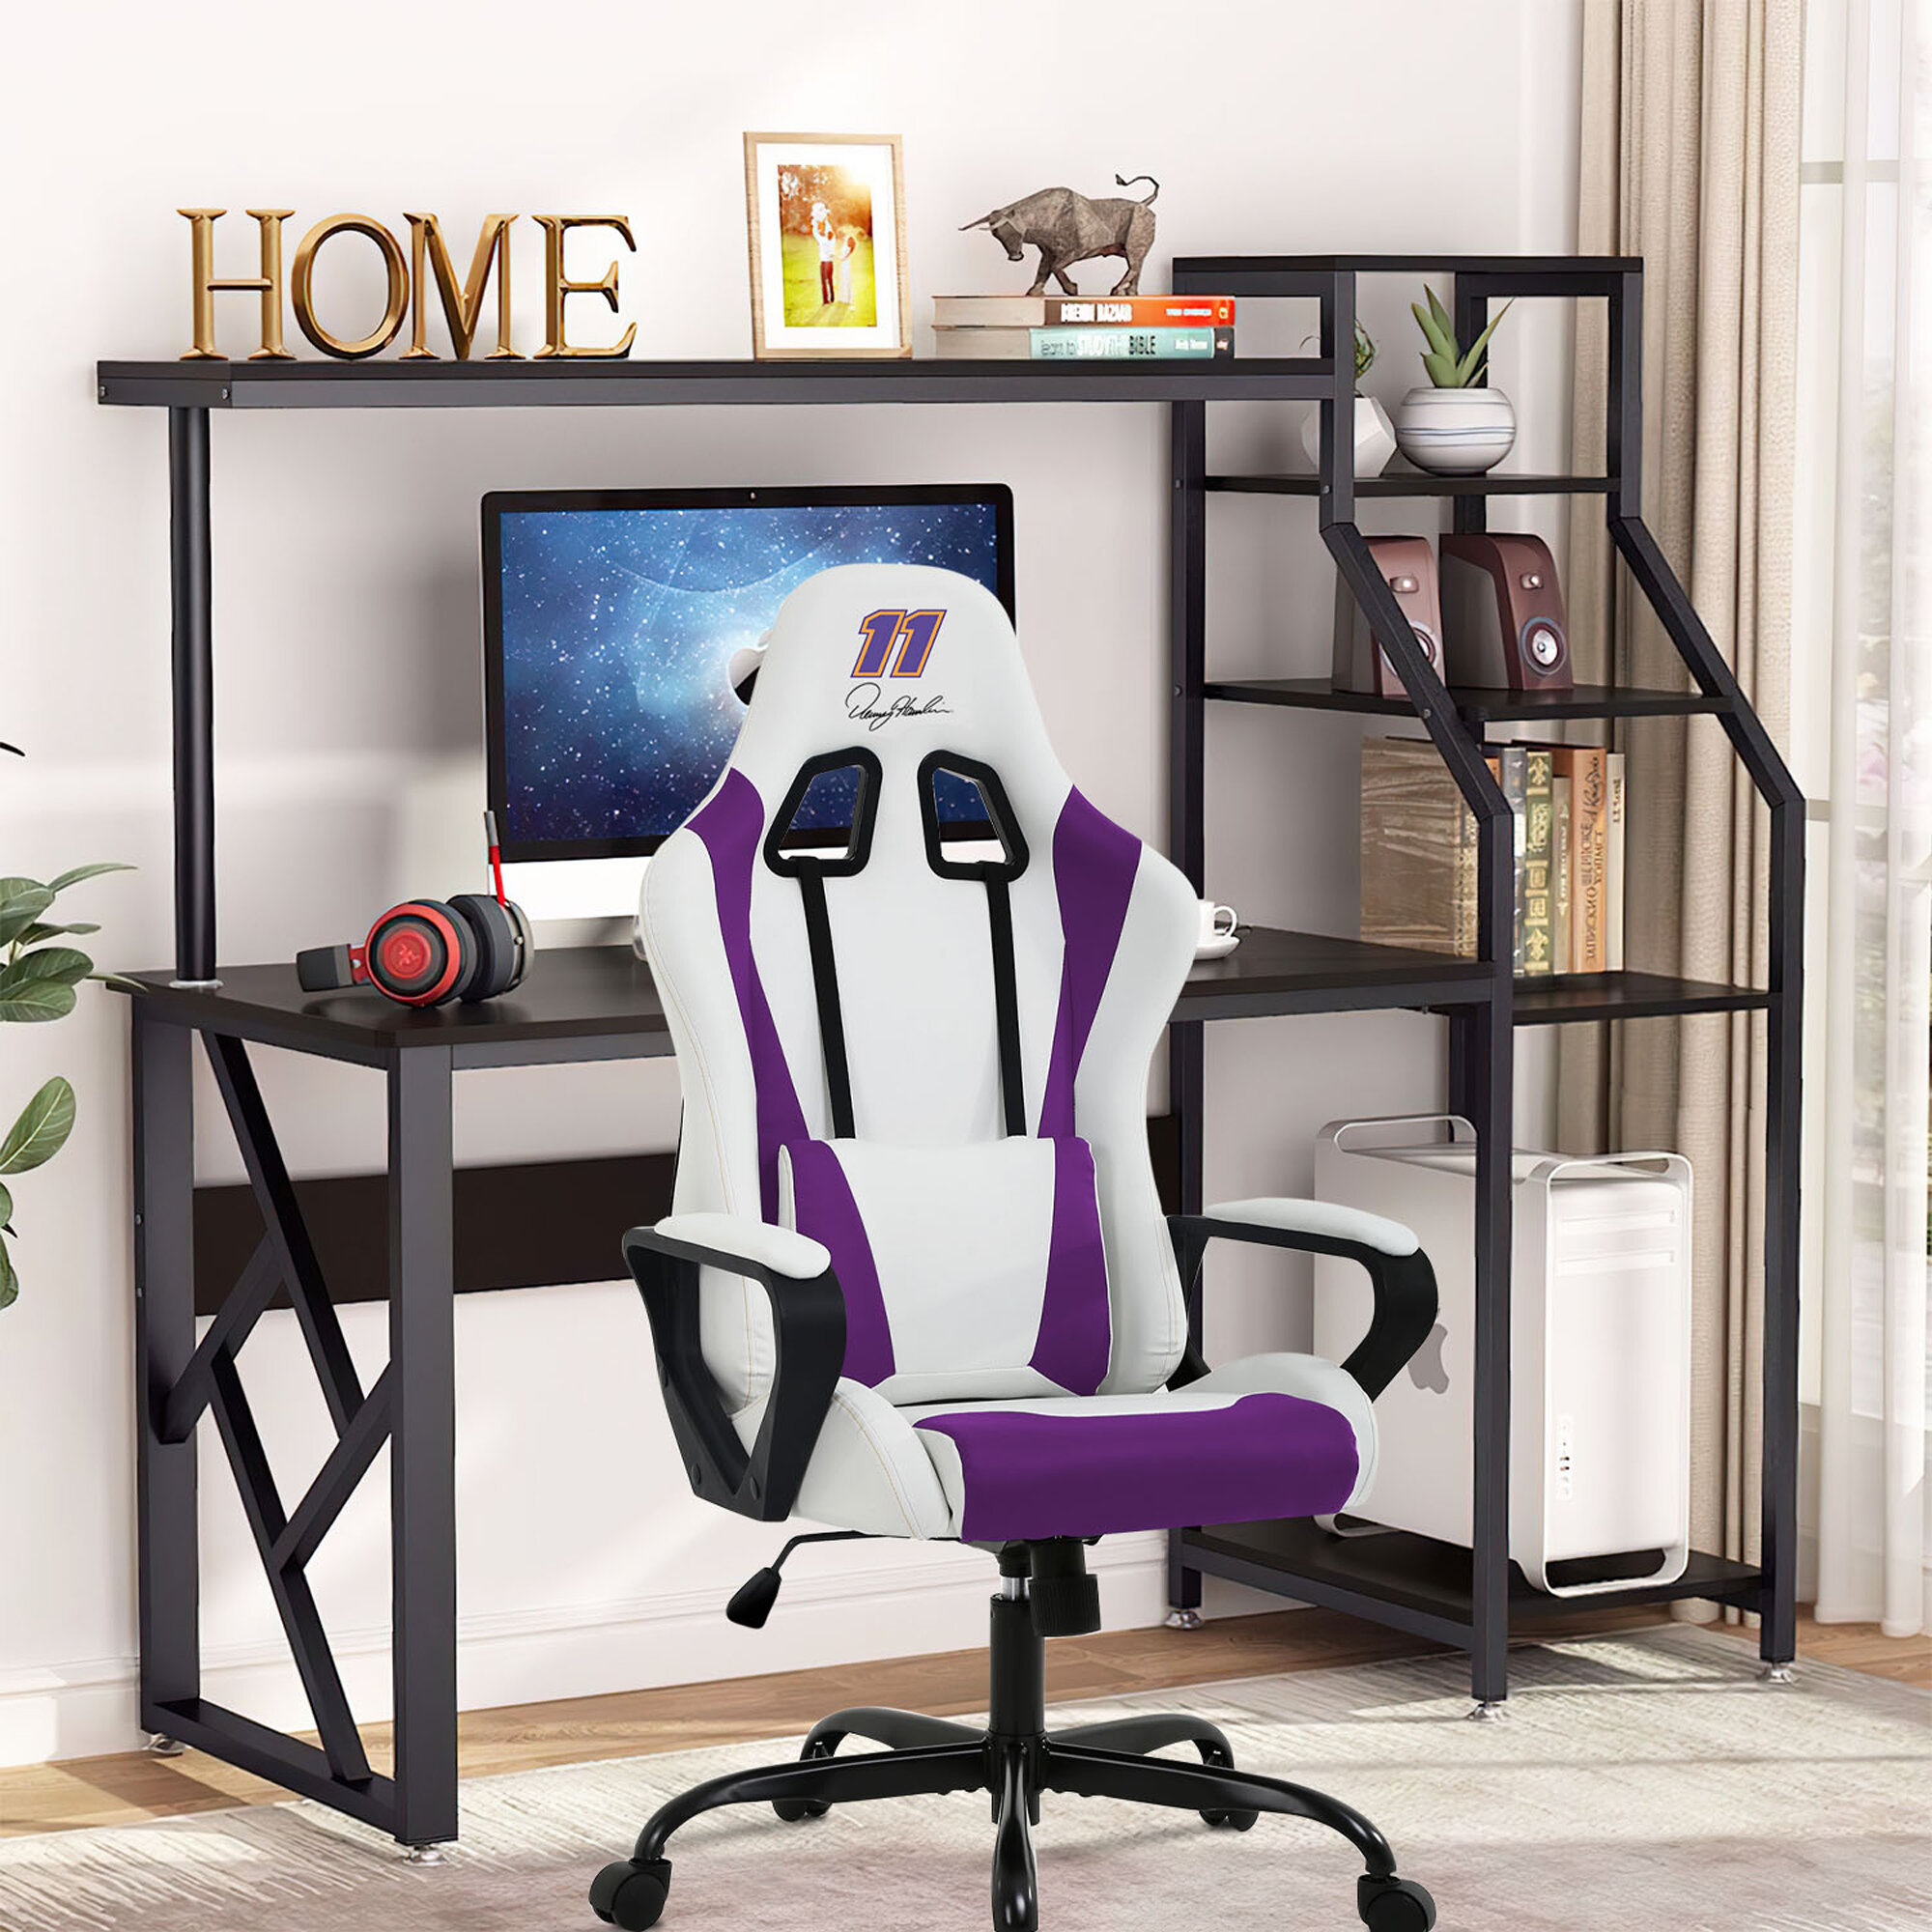 Swivel Gaming Chair Racing Ergonomic Recliner Office Computer Desk Seat Chairs 